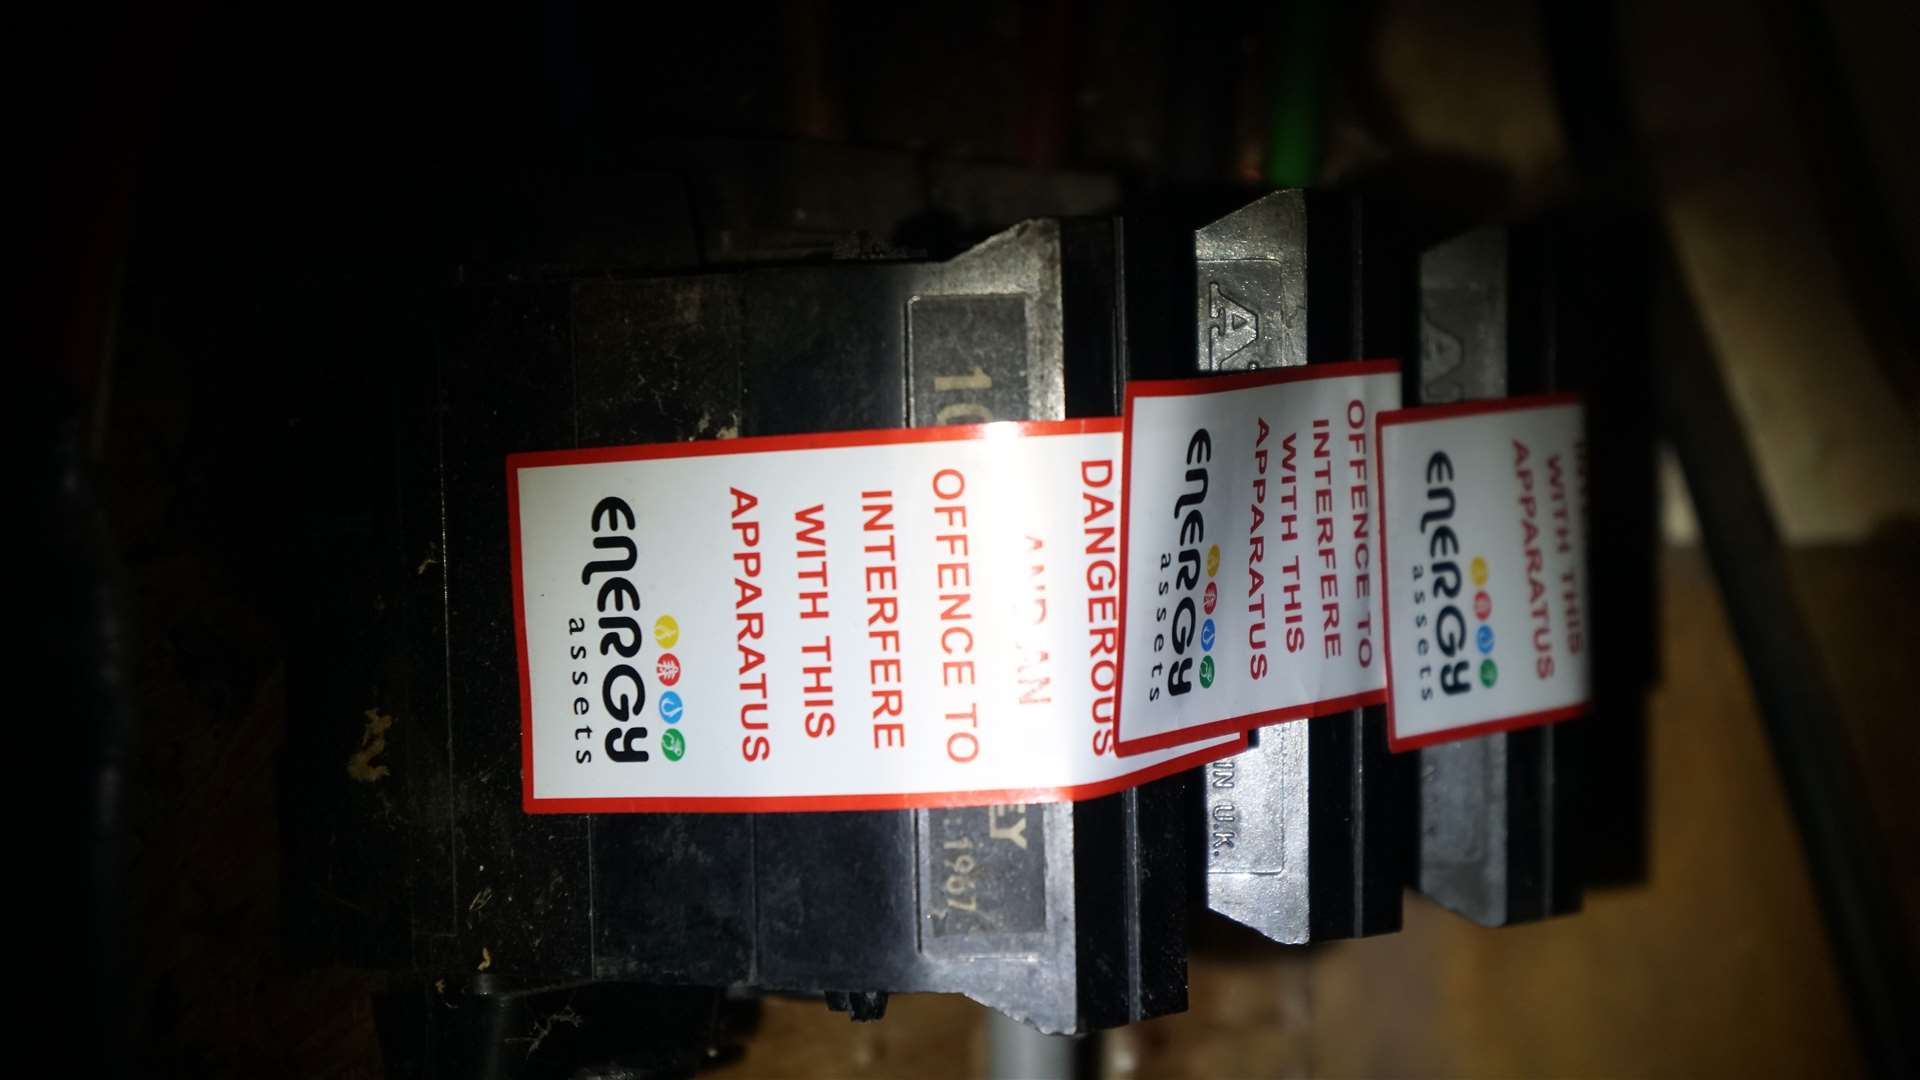 Stickers placed in the electrical supply box warning it is an offence to tamper with them. Picture: DGS